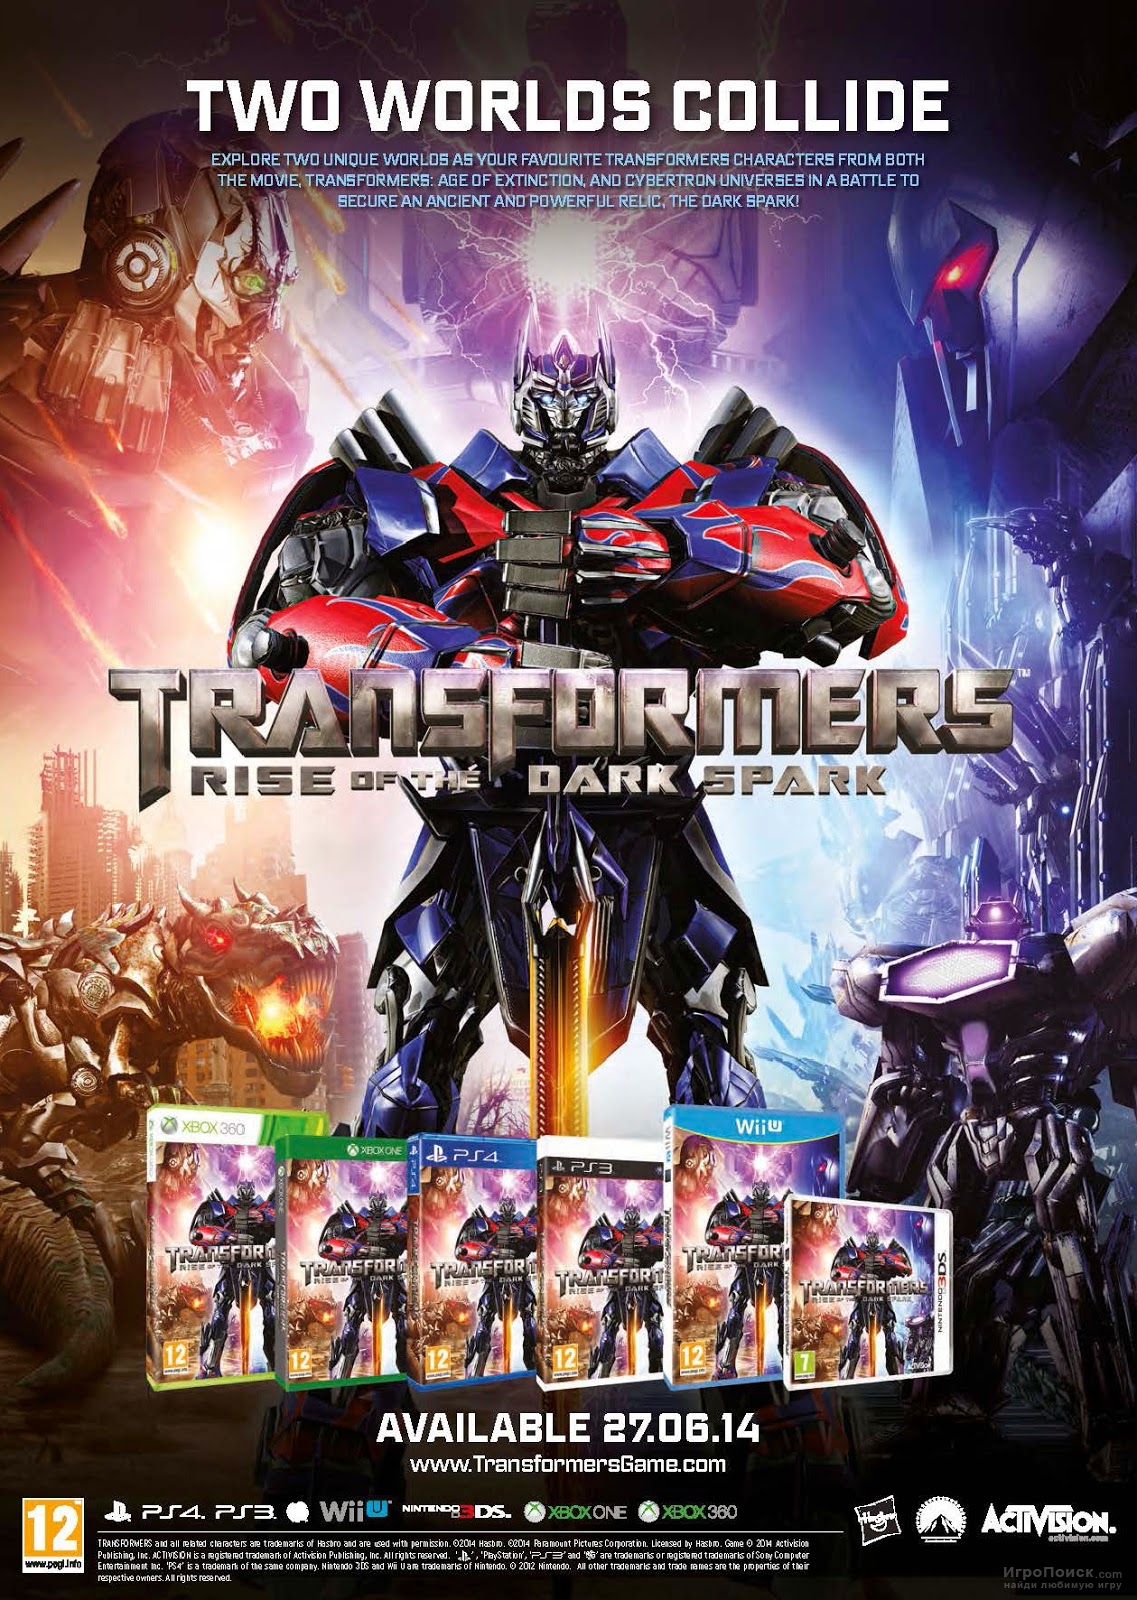    Transformers: Age of Extinction - The Official Game